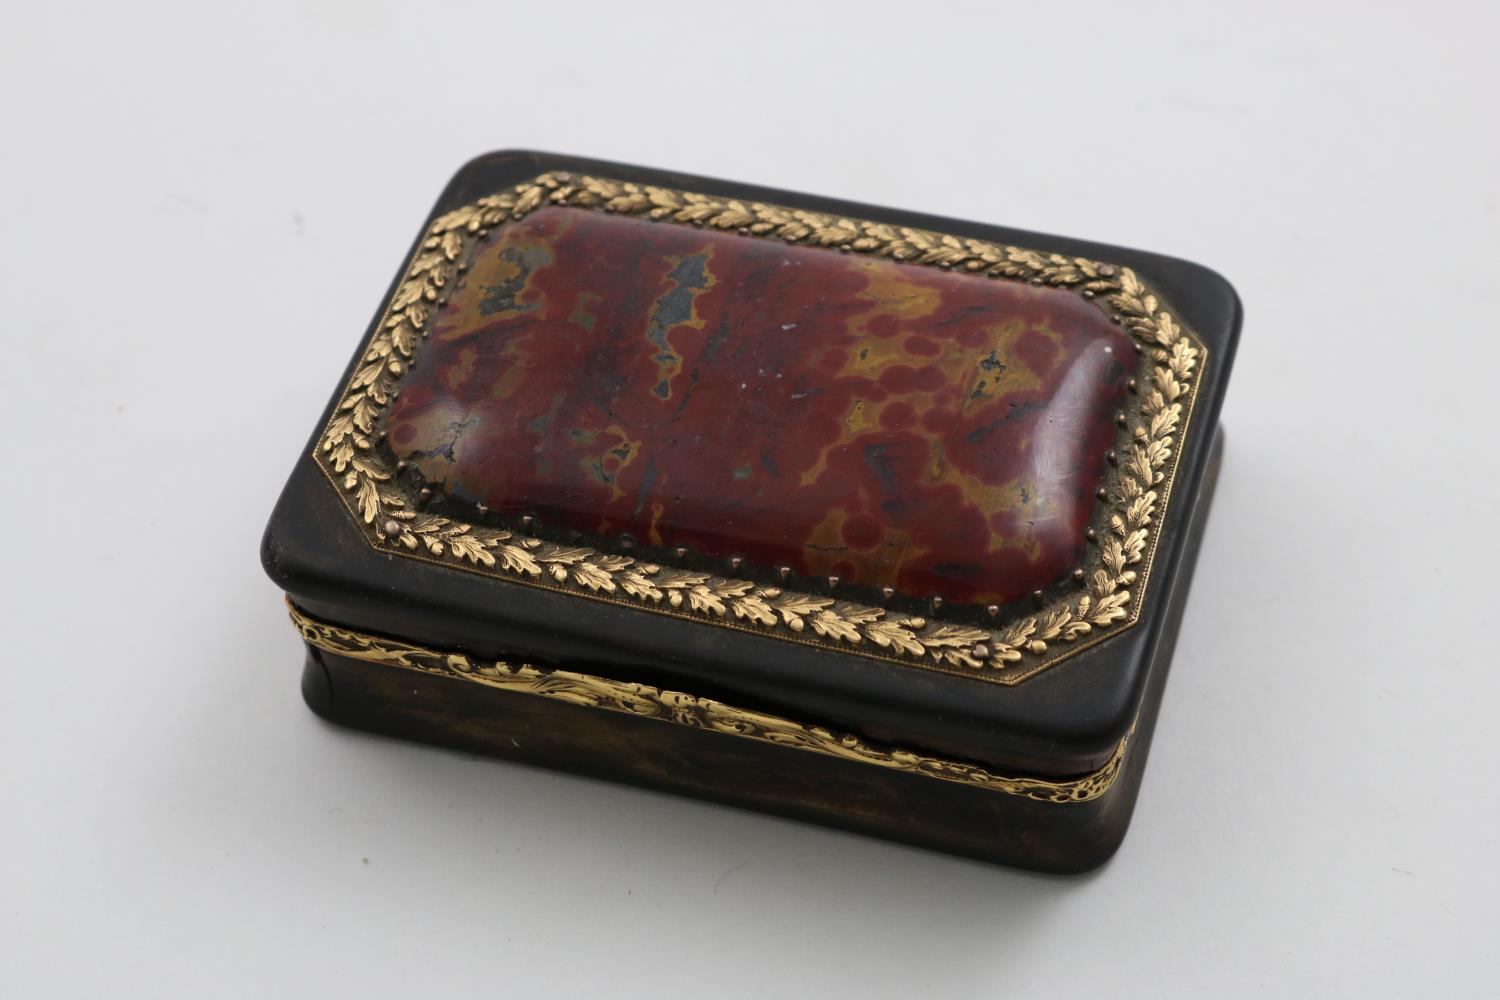 A GEORGE III GOLD MOUNTED TORTOISESHELL SNUFF BOX rectangular with chased borders, the cover set